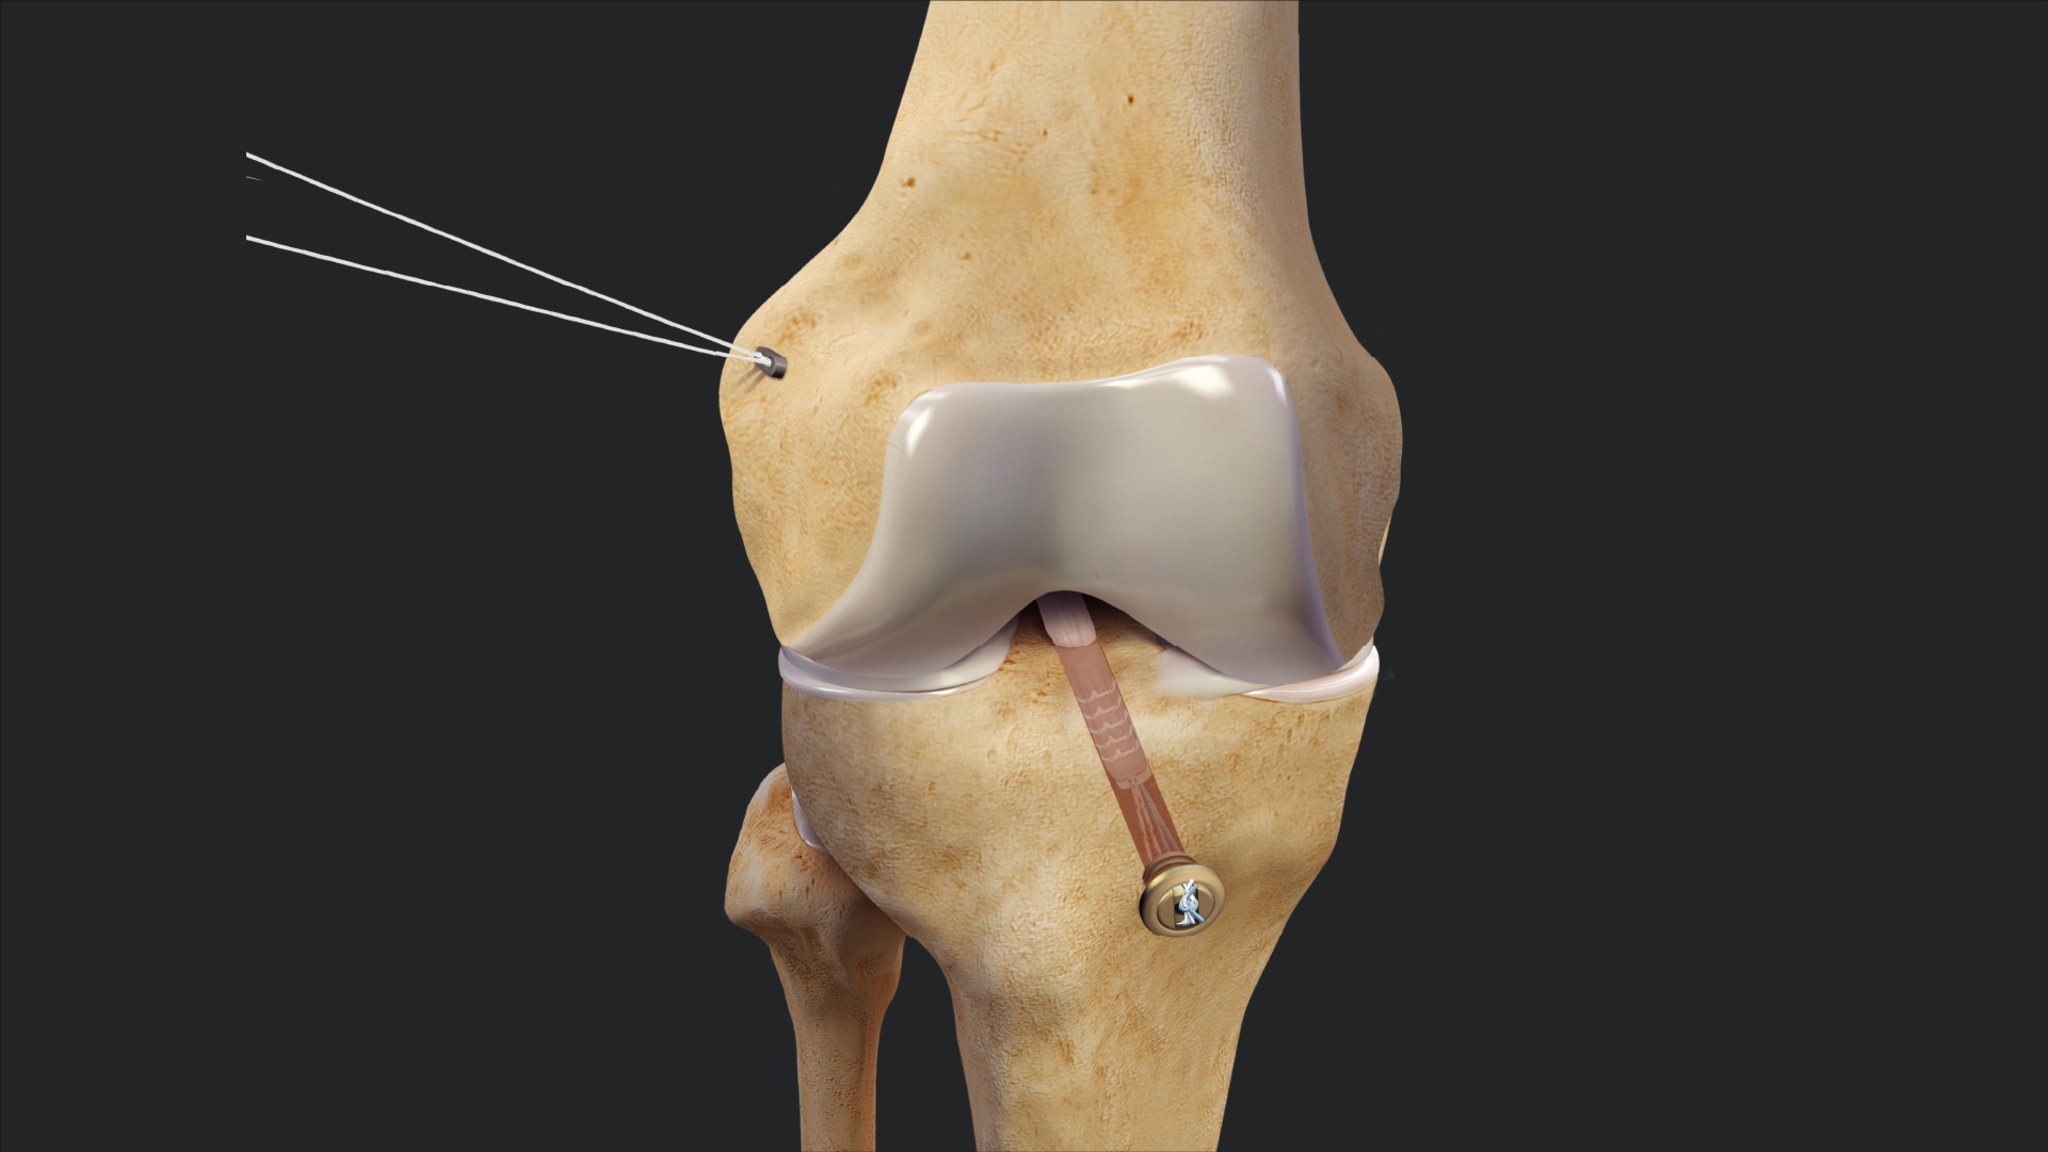 Arthroscopic ACL Reconstruction With ACL Remnant Preservation